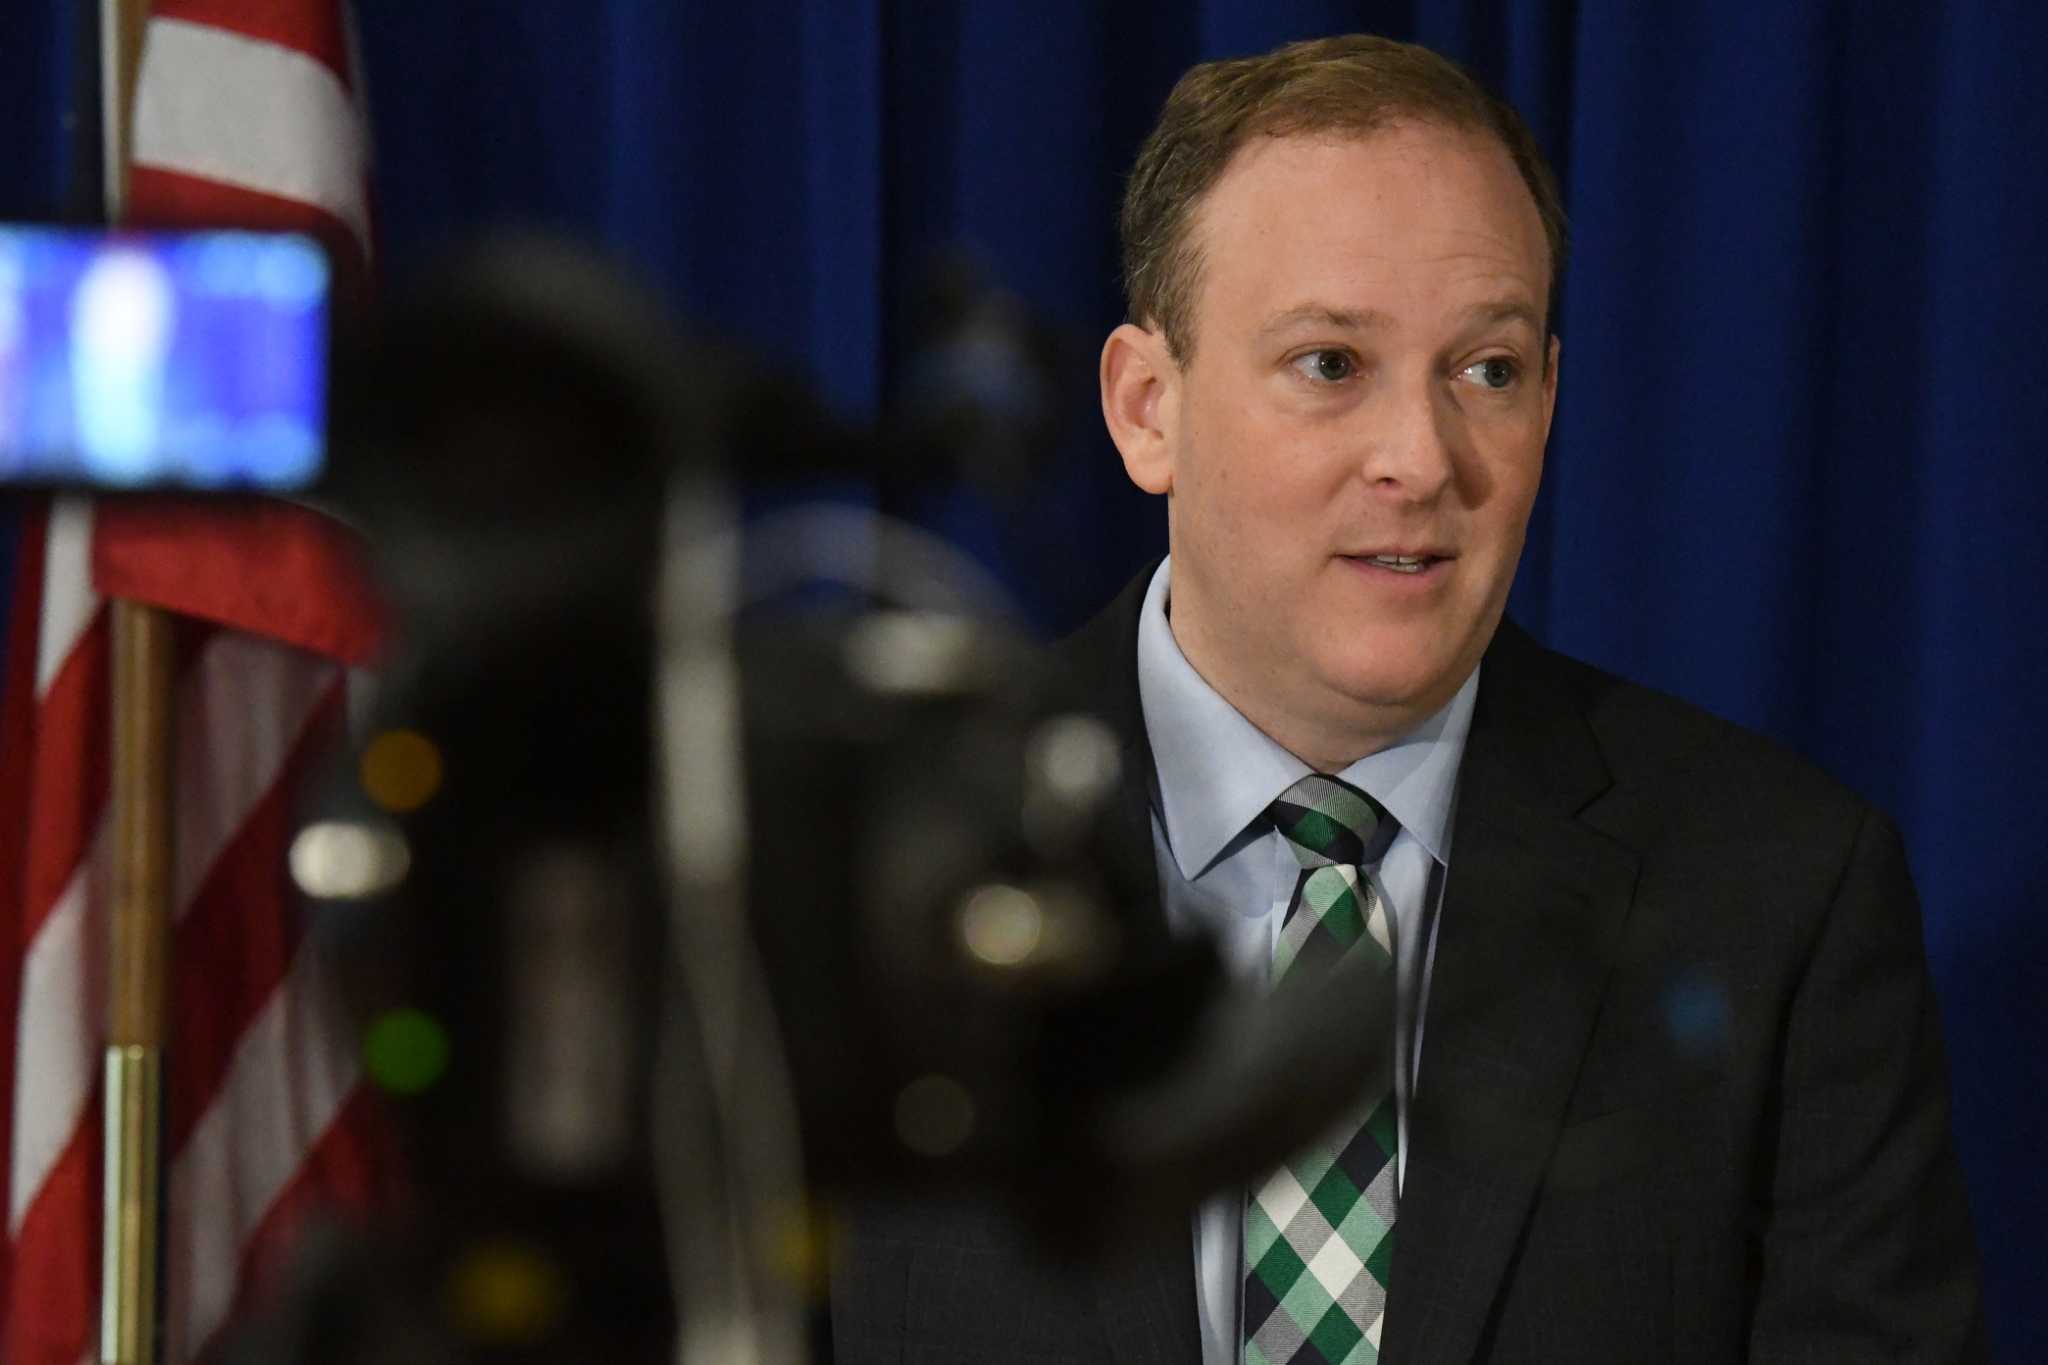 Lee Zeldin, GOP nominee for governor, assaulted at upstate rally